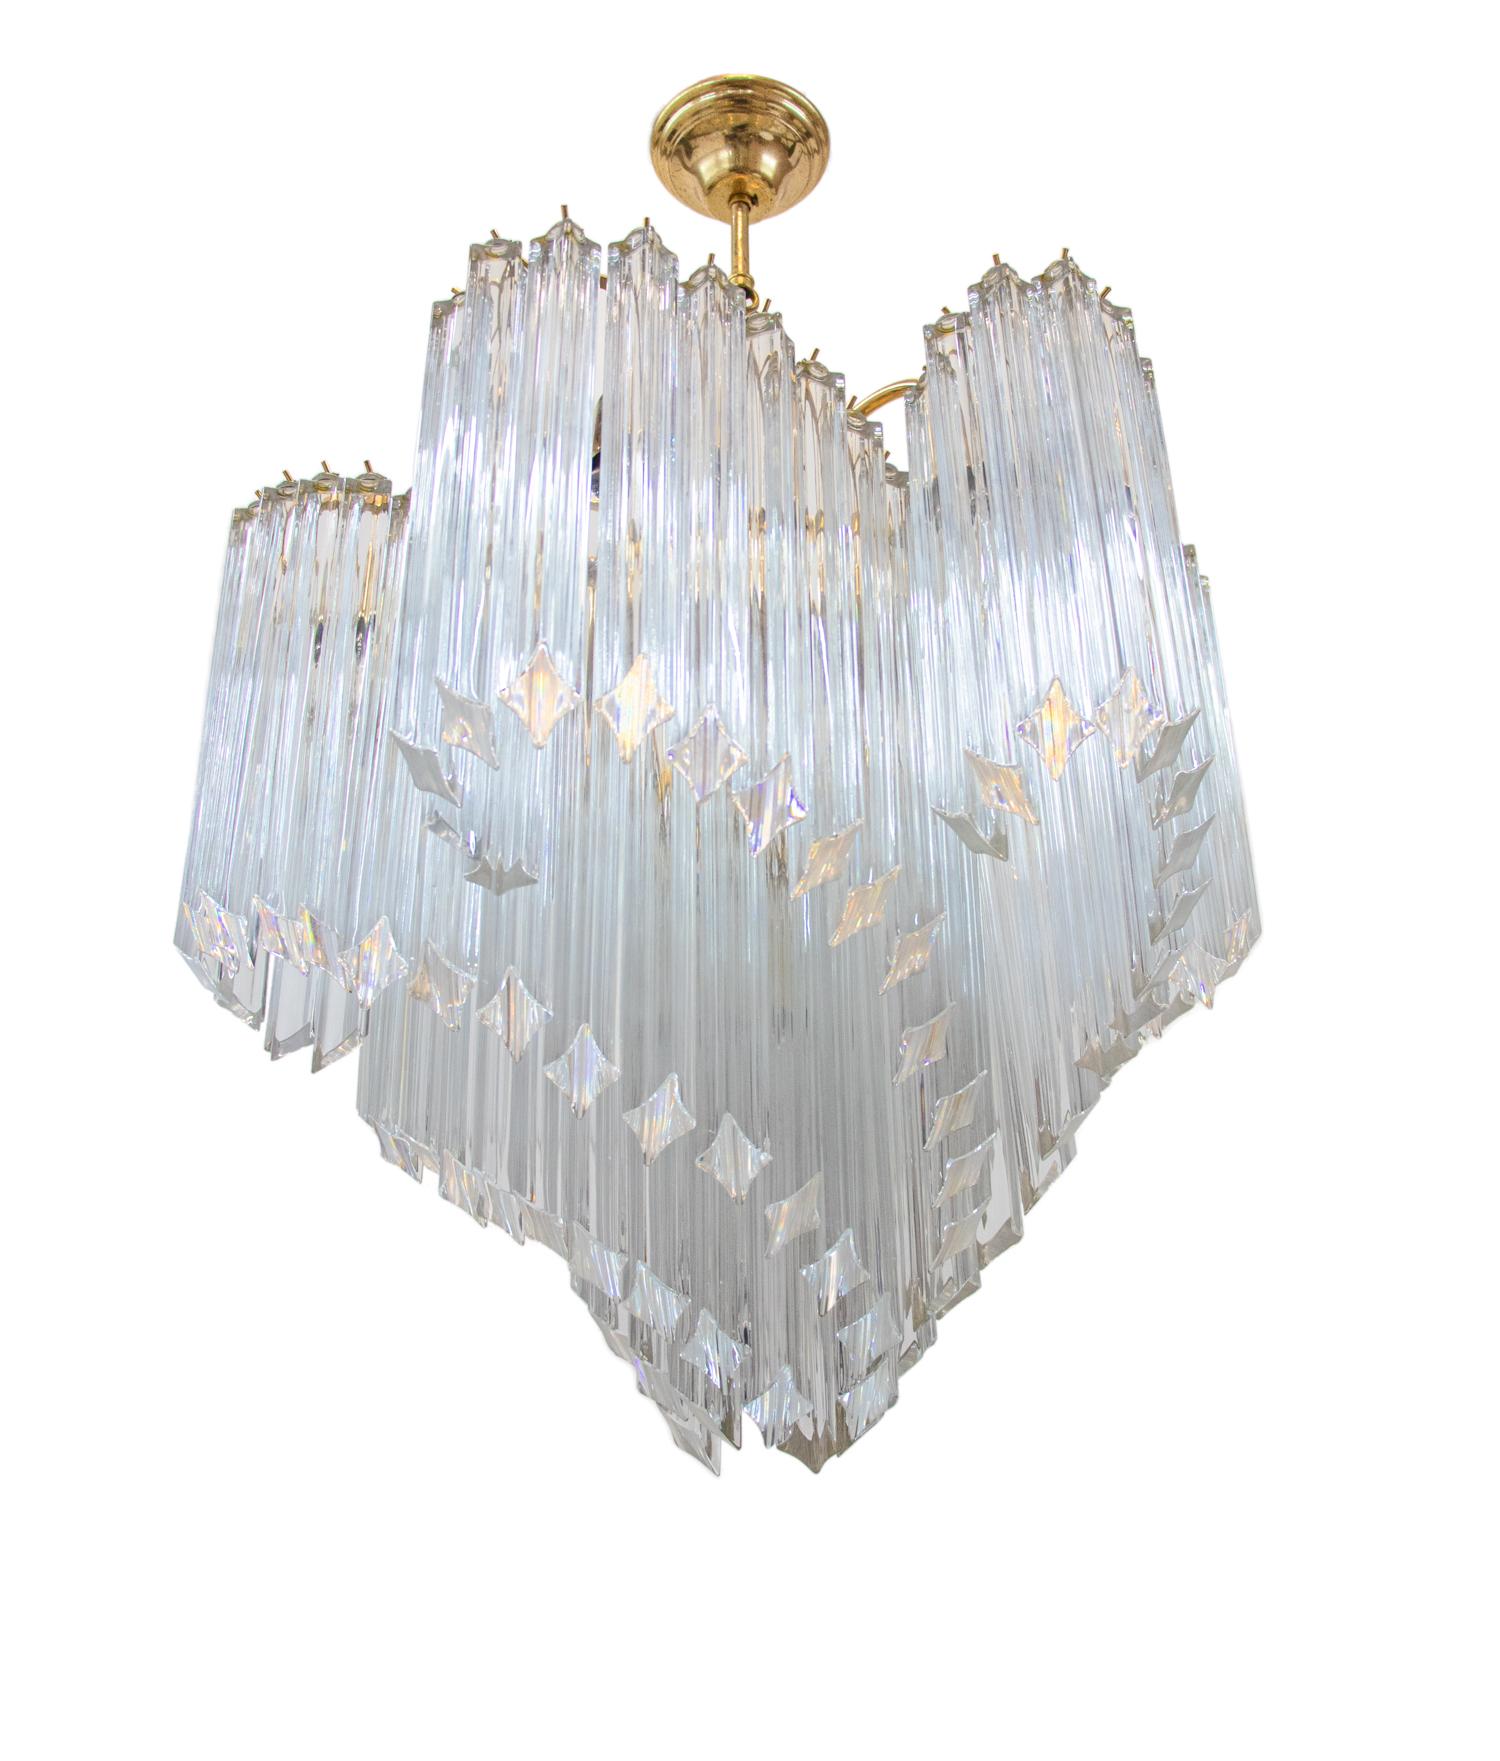 Elegant large and heavy chandelier with crystal 'Quadriedri' prisms on a spiral shaped golden metal frame. 

Measures: diameter 23.6